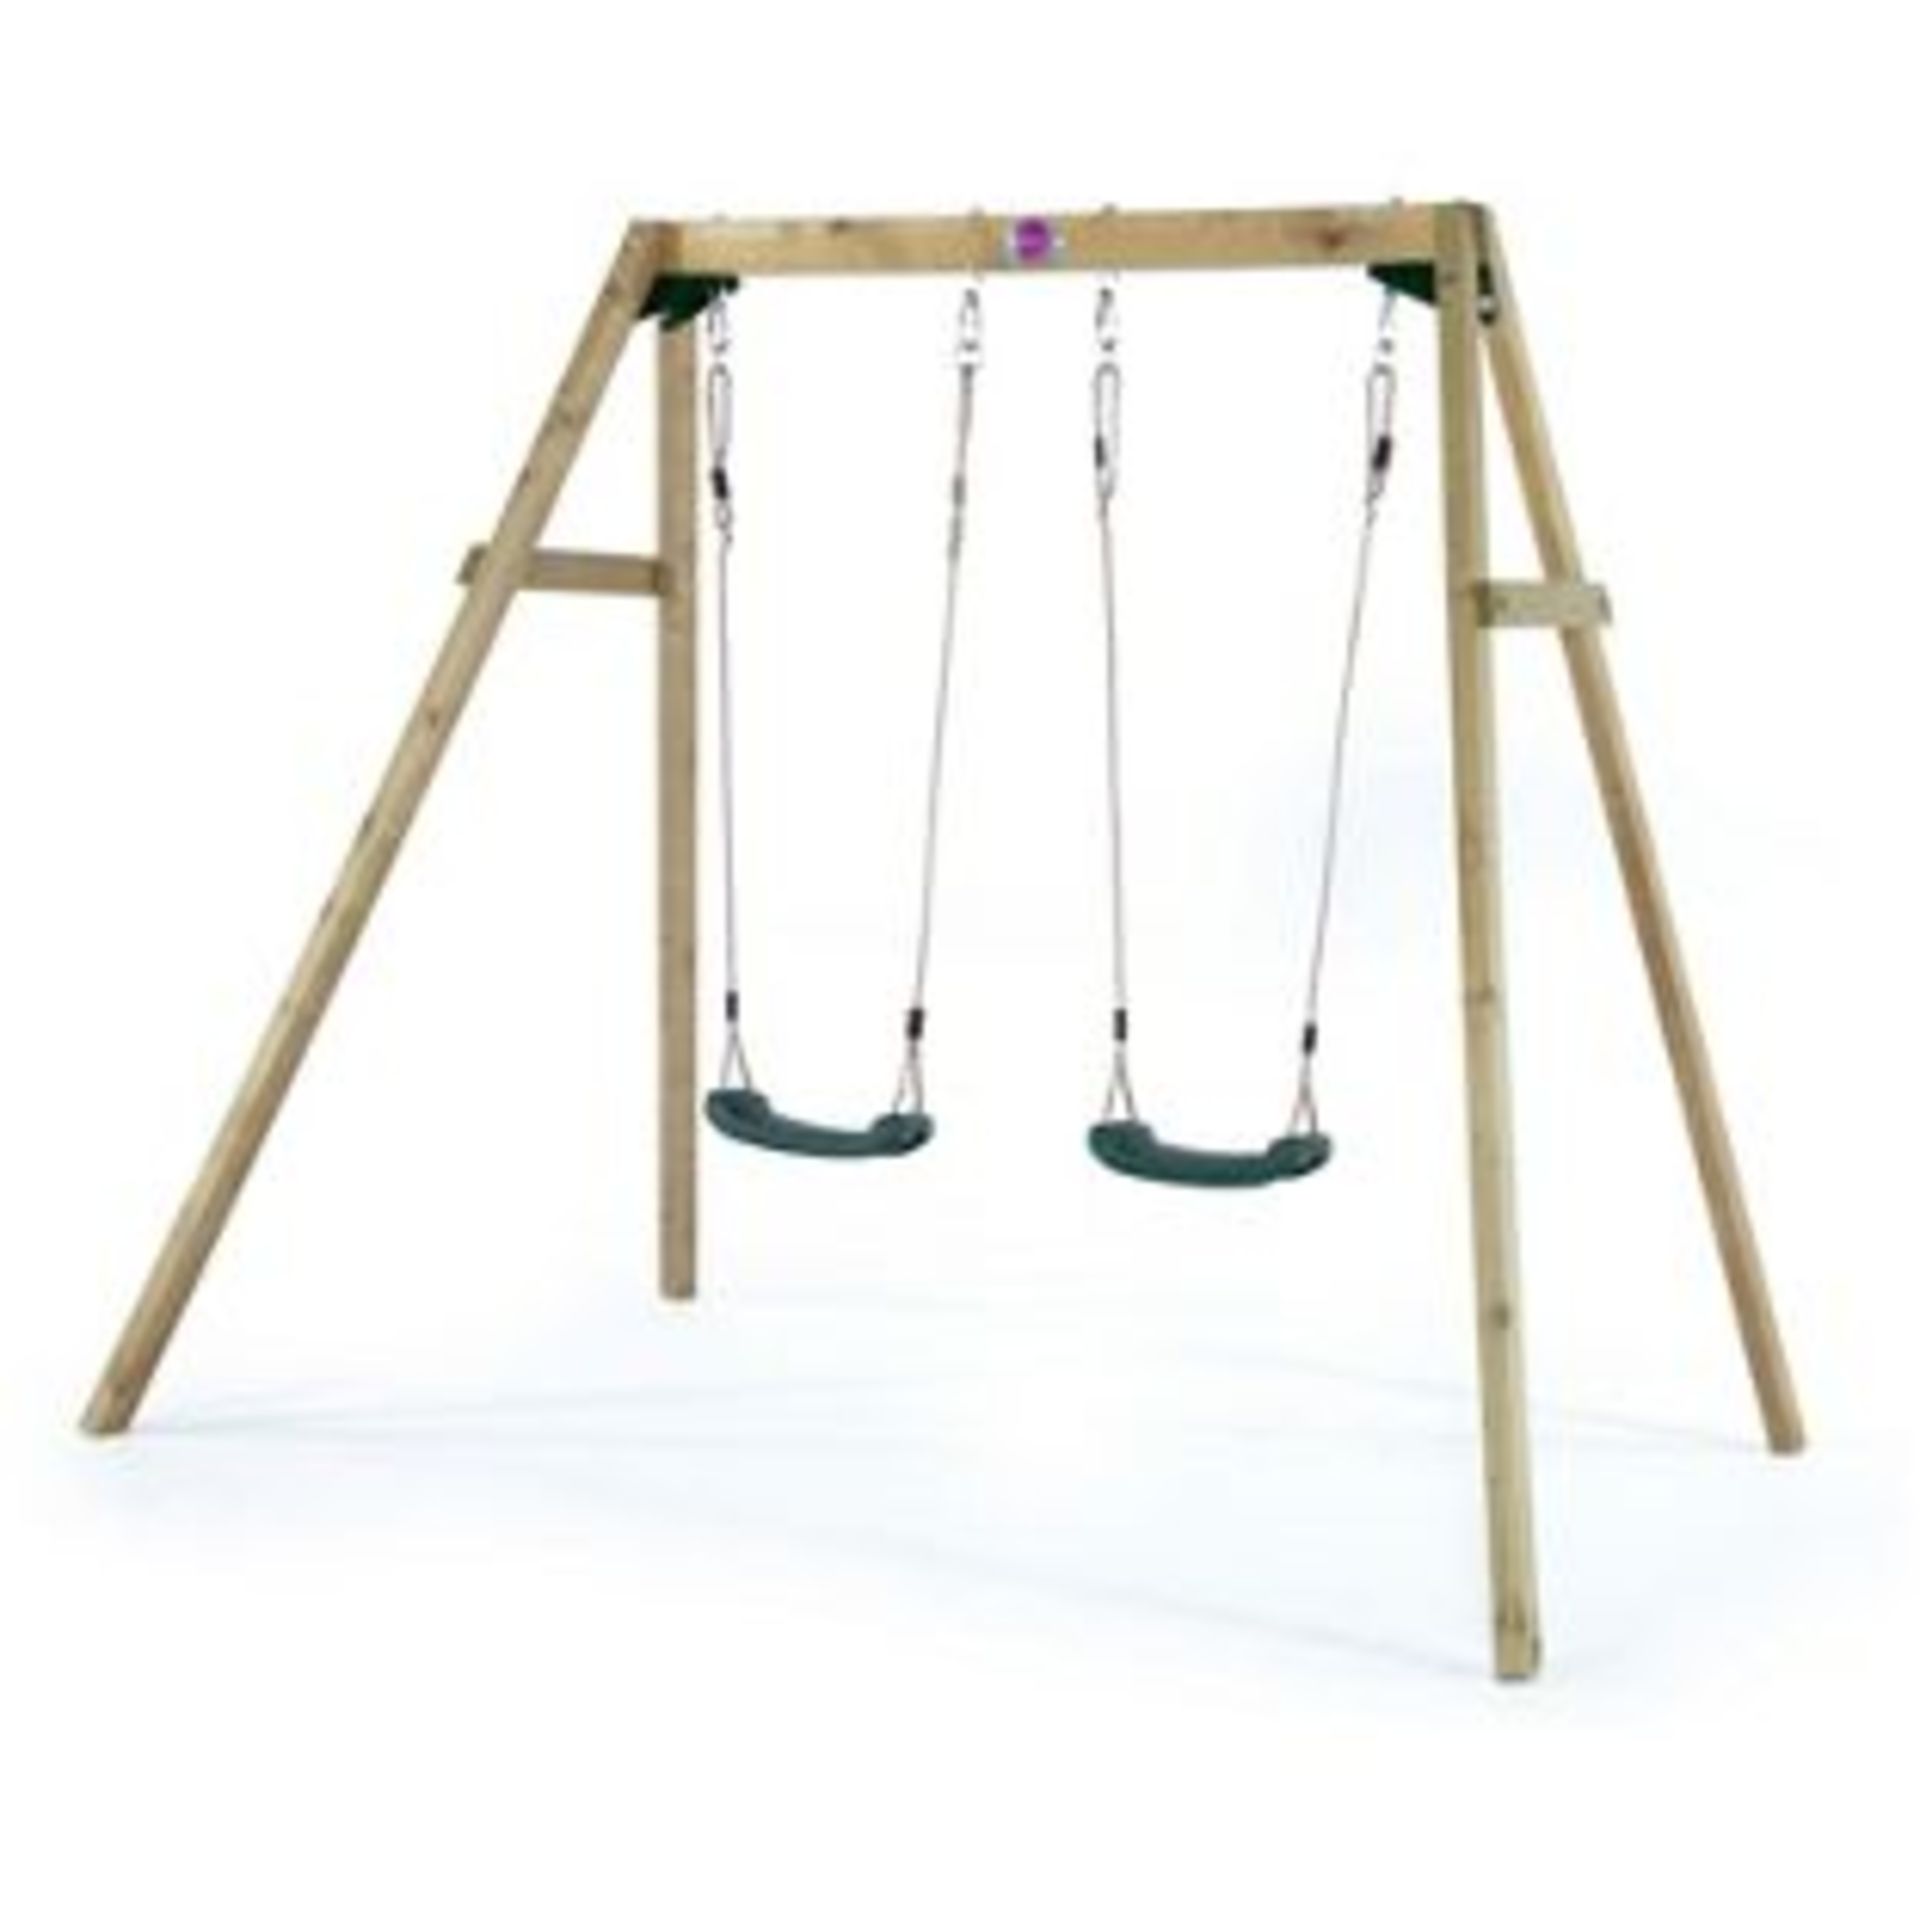 1 x Plum Wooden Double Swing Set. RRP £199.99. Double the seats for twice the fun! Children will - Image 2 of 5